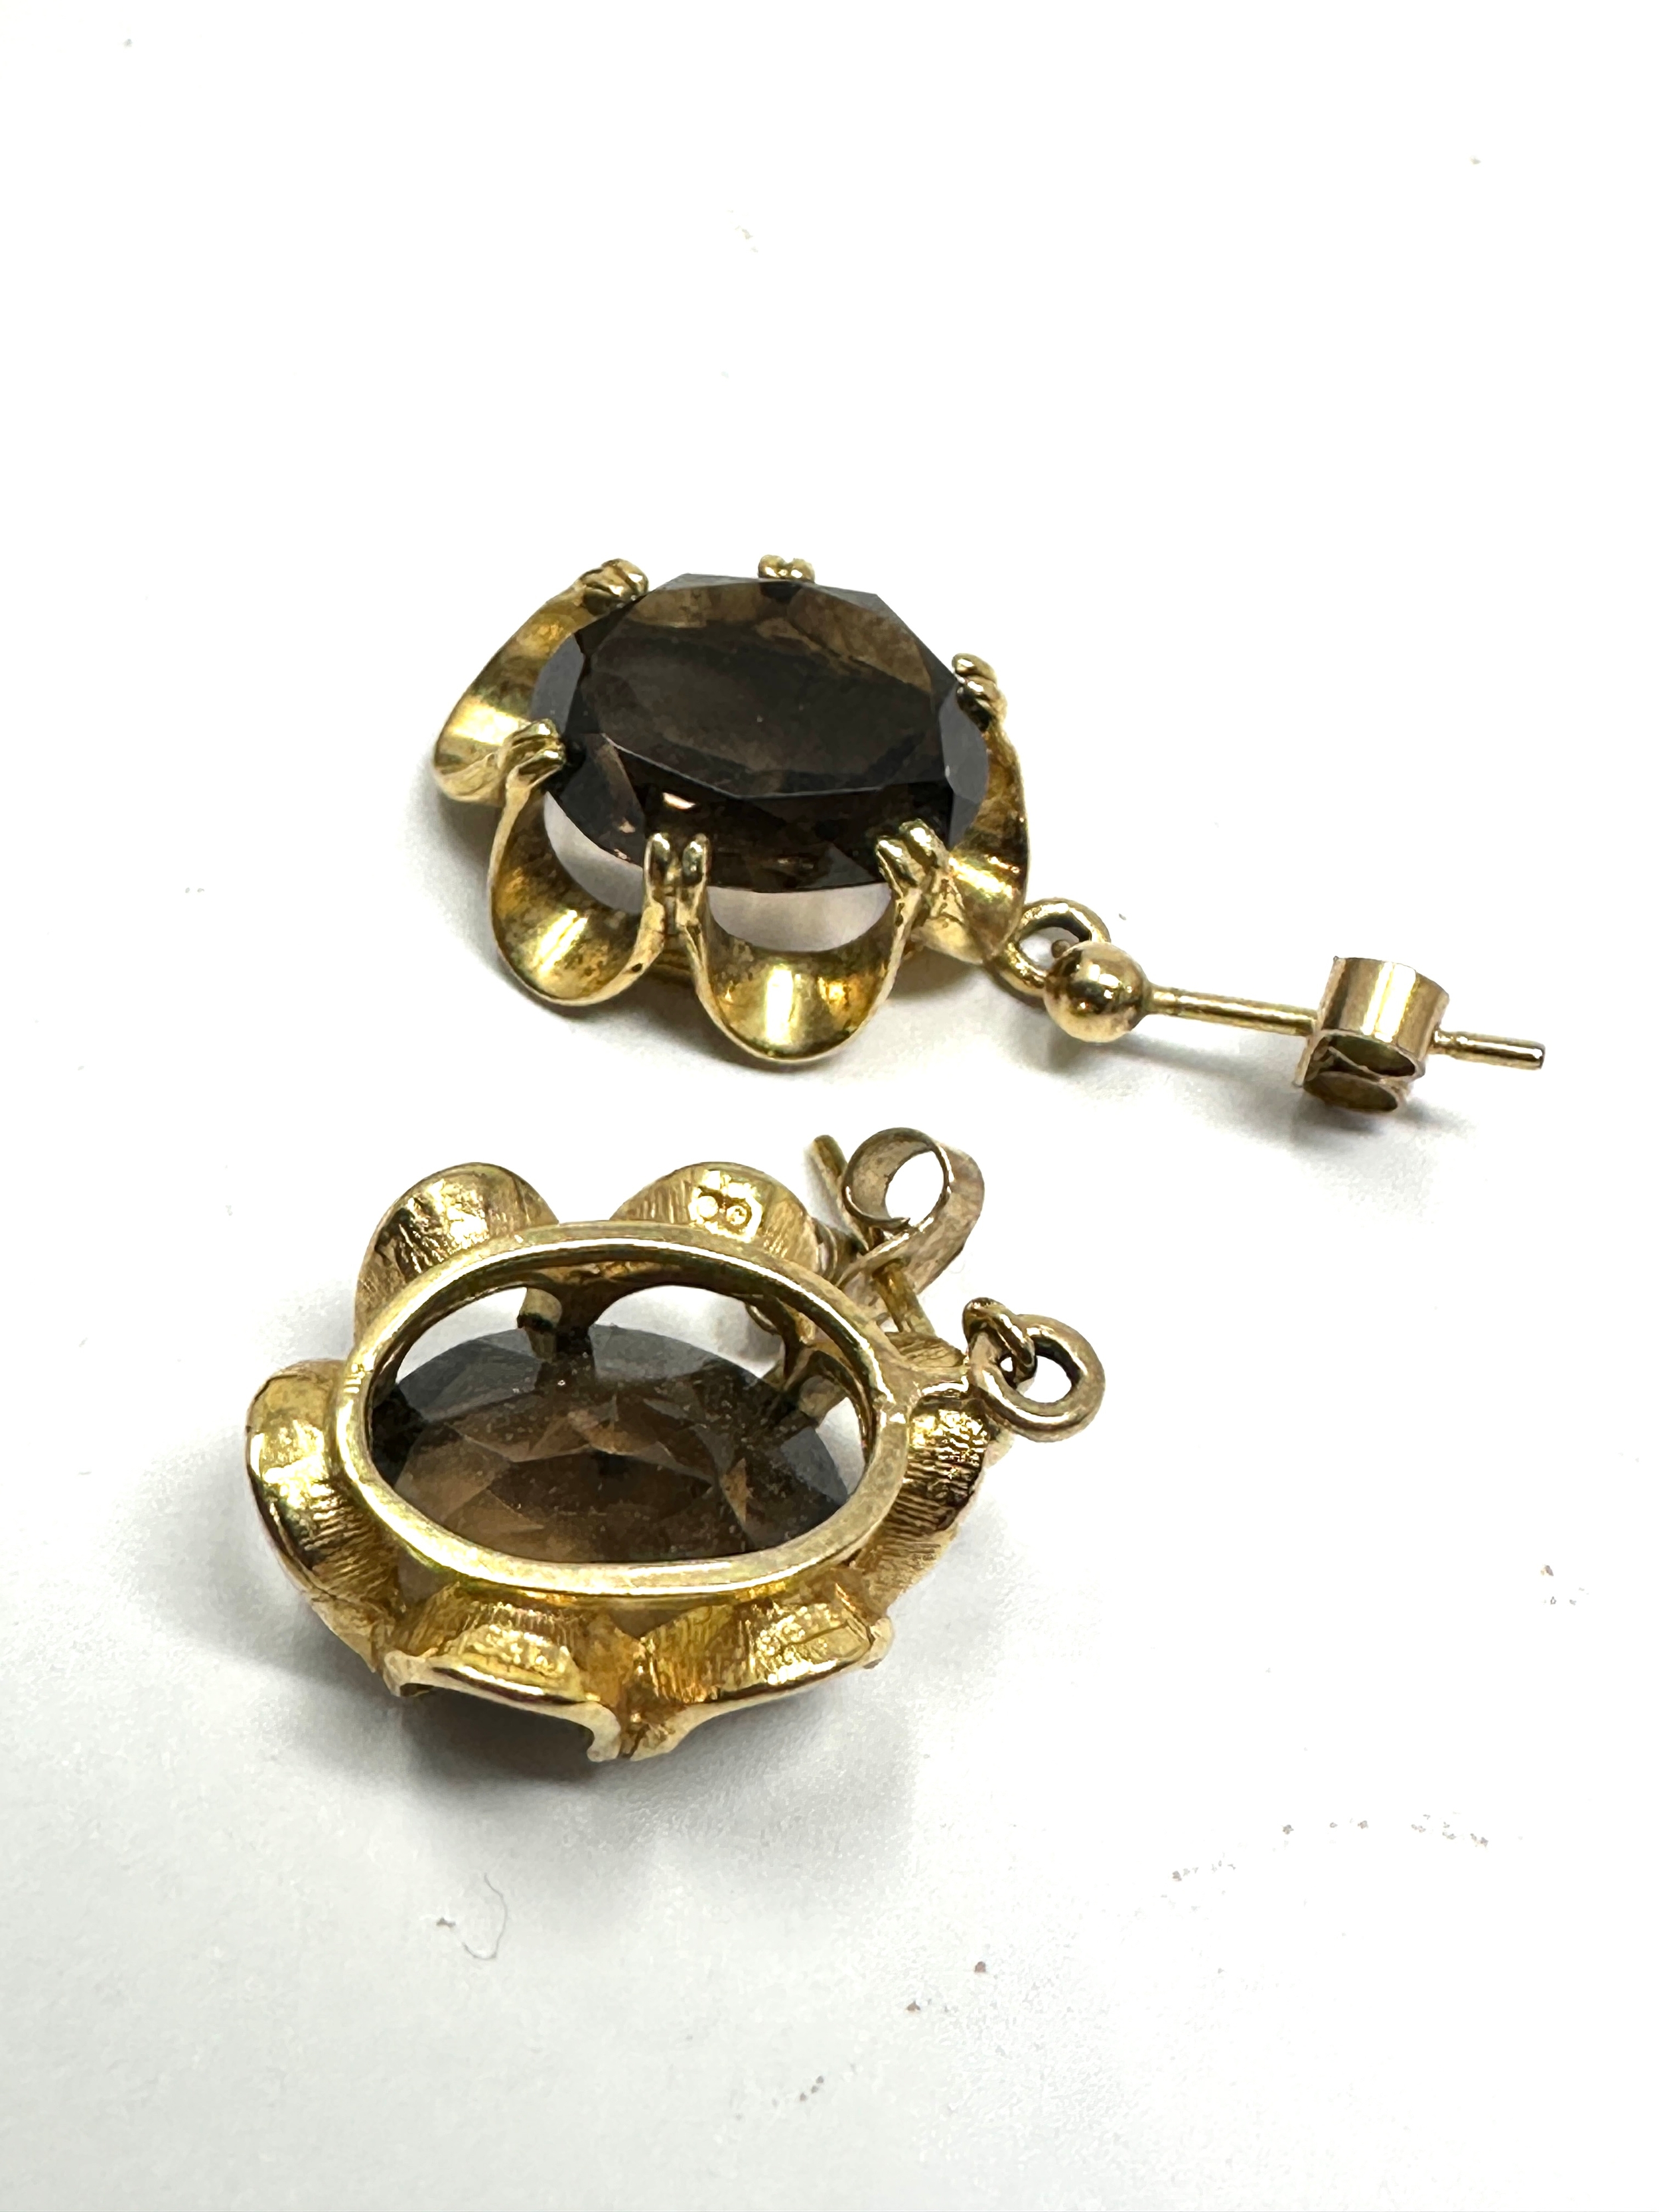 9ct gold smoky quartz earrings weight 5.1g - Image 3 of 3